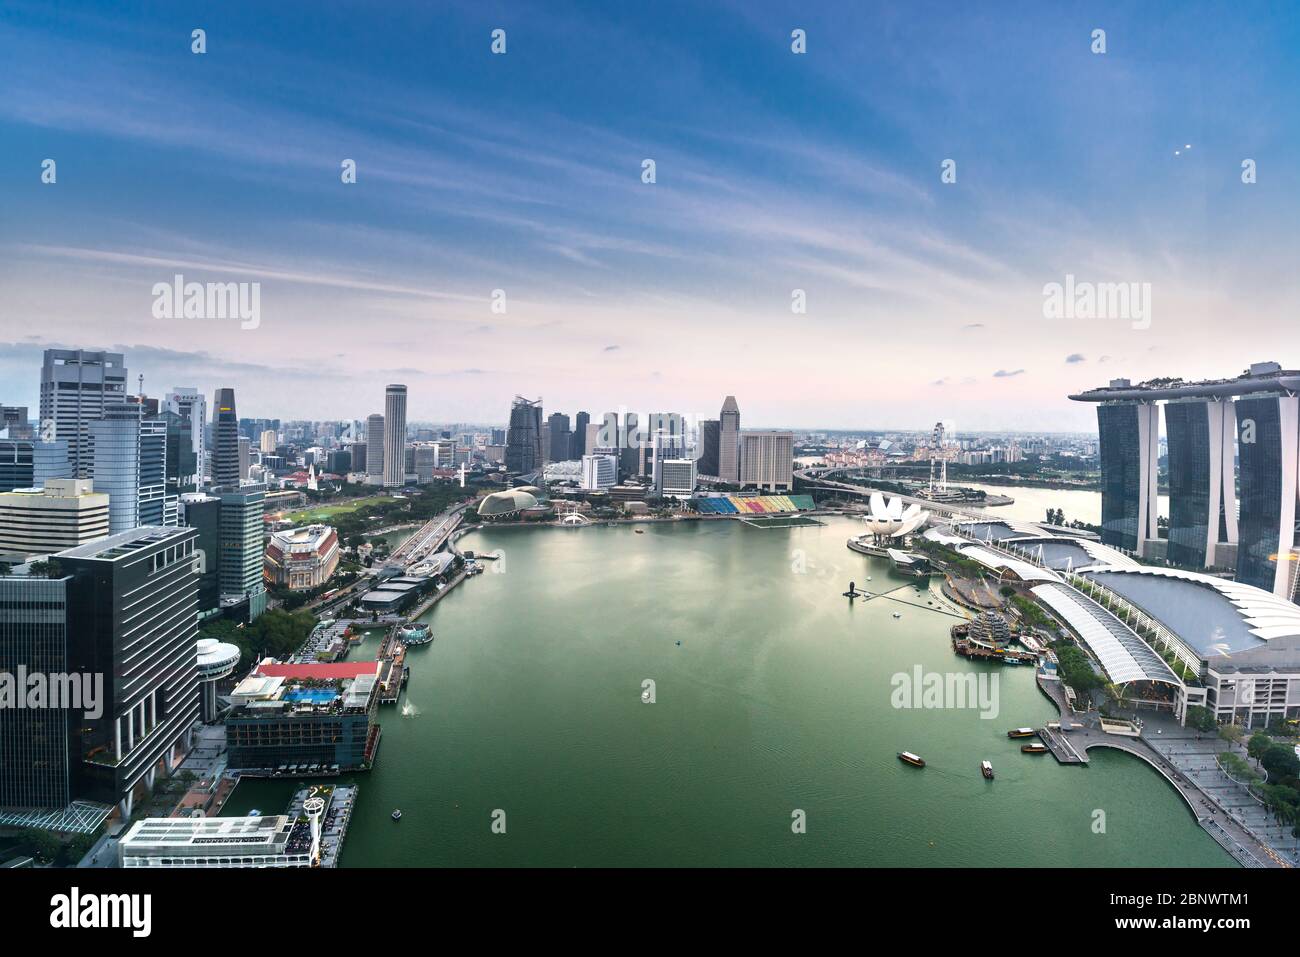 Singapore Marina Bay Area Skyline View. by night from Level 33 craft brewery Stock Photo